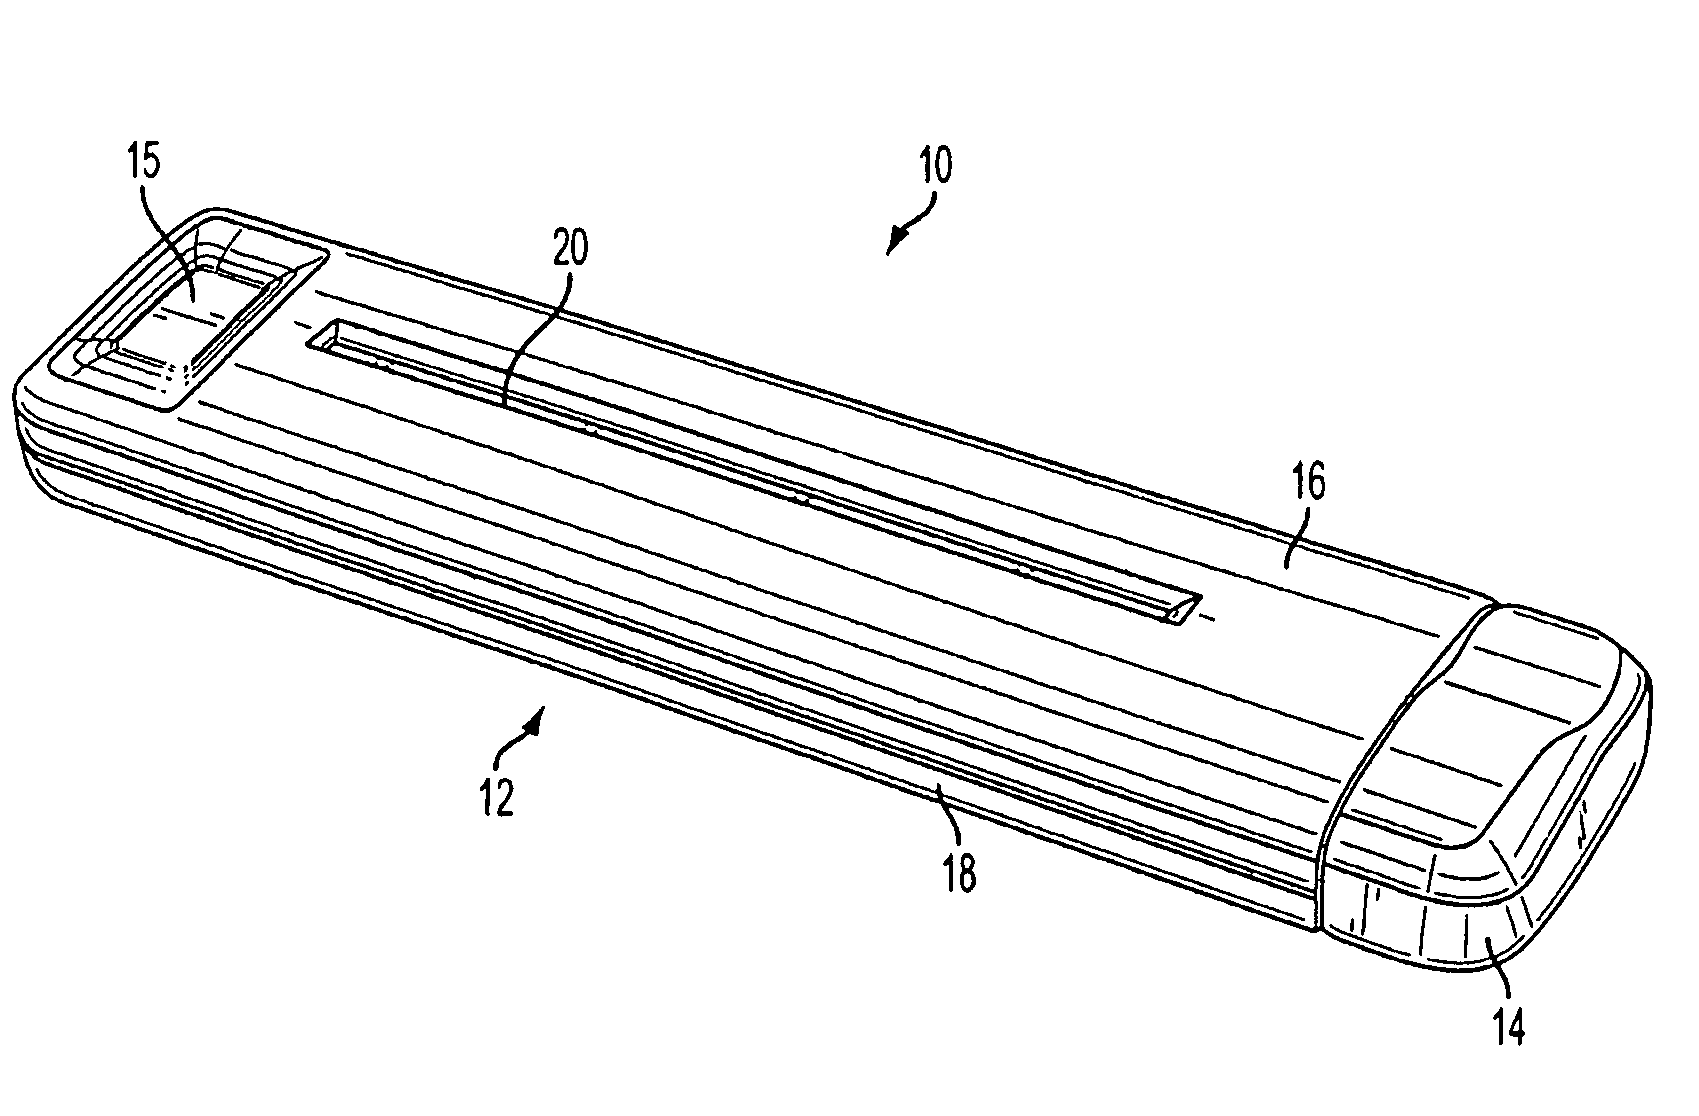 Hand-held shredding device for paper or the like